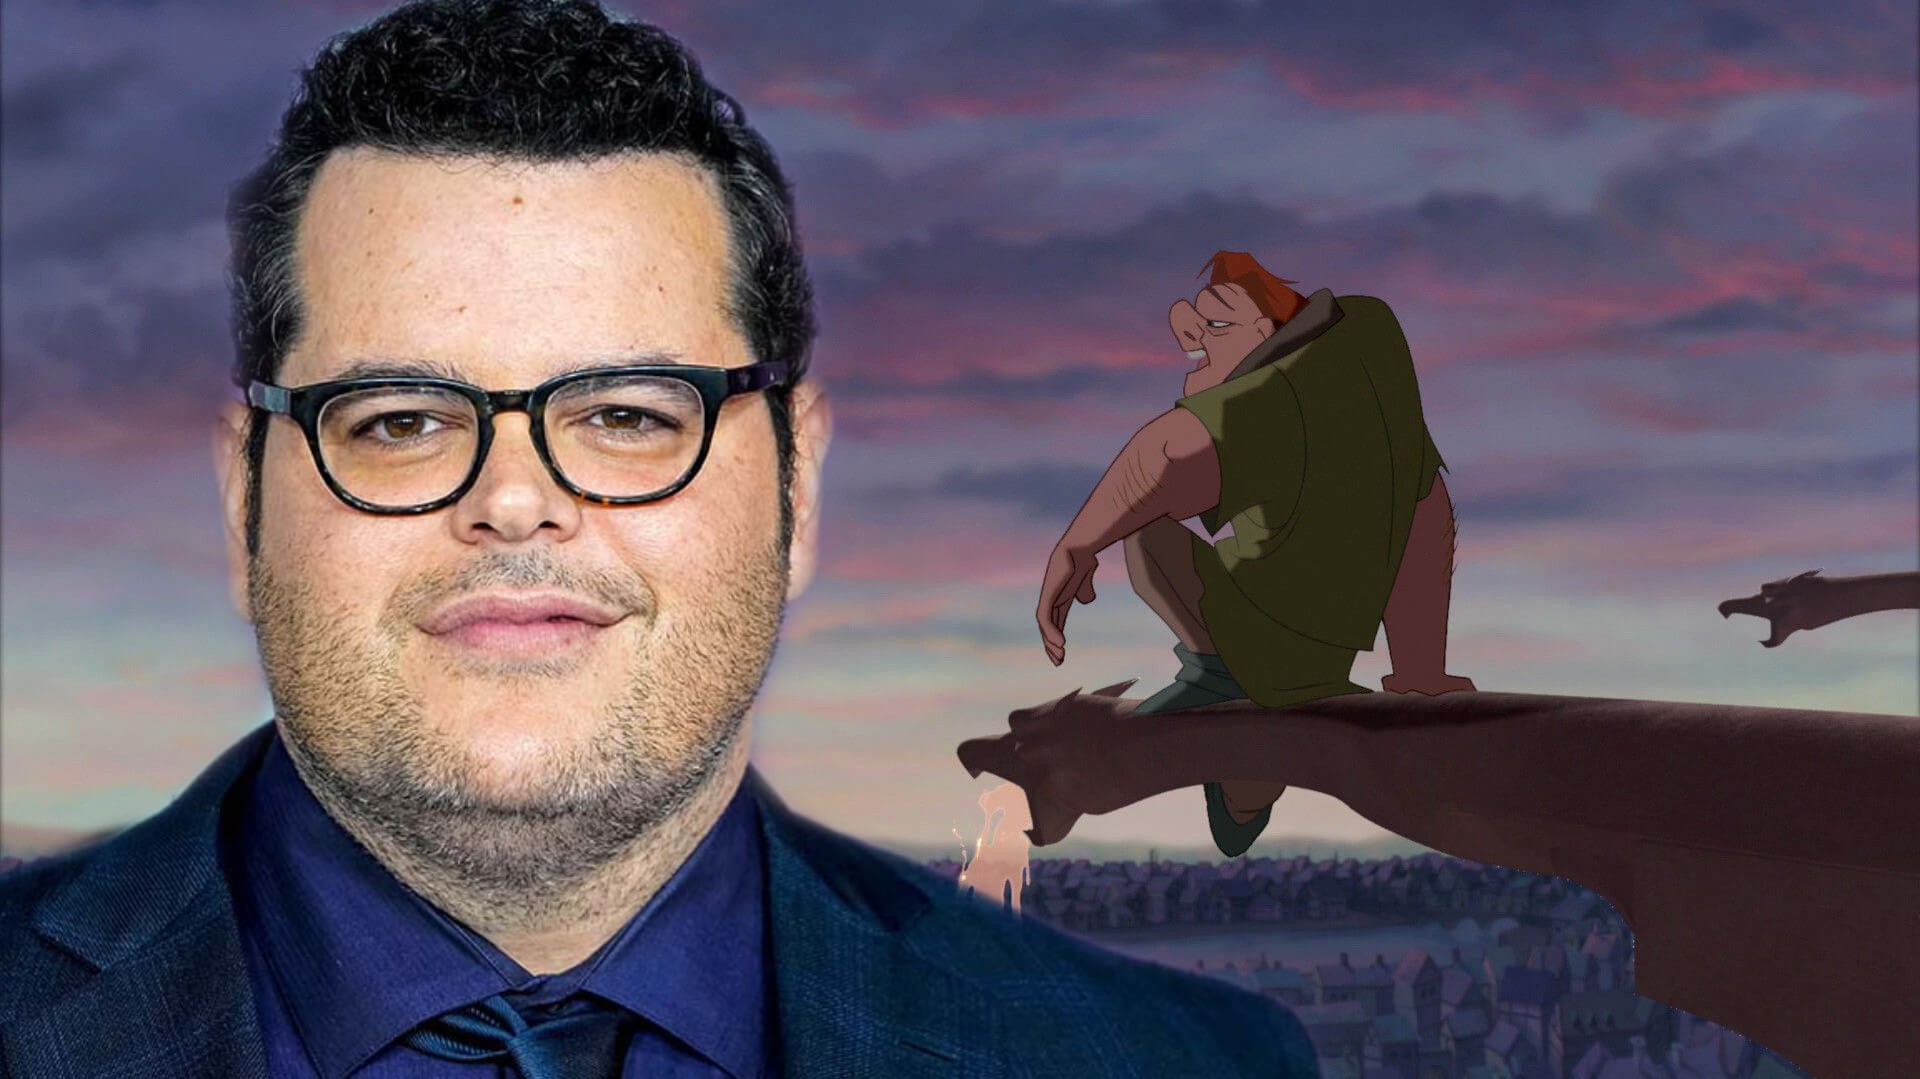 Josh Gad Shares a Small Update on Disney’s Live-Action ‘Hunchback of Notre Dame’